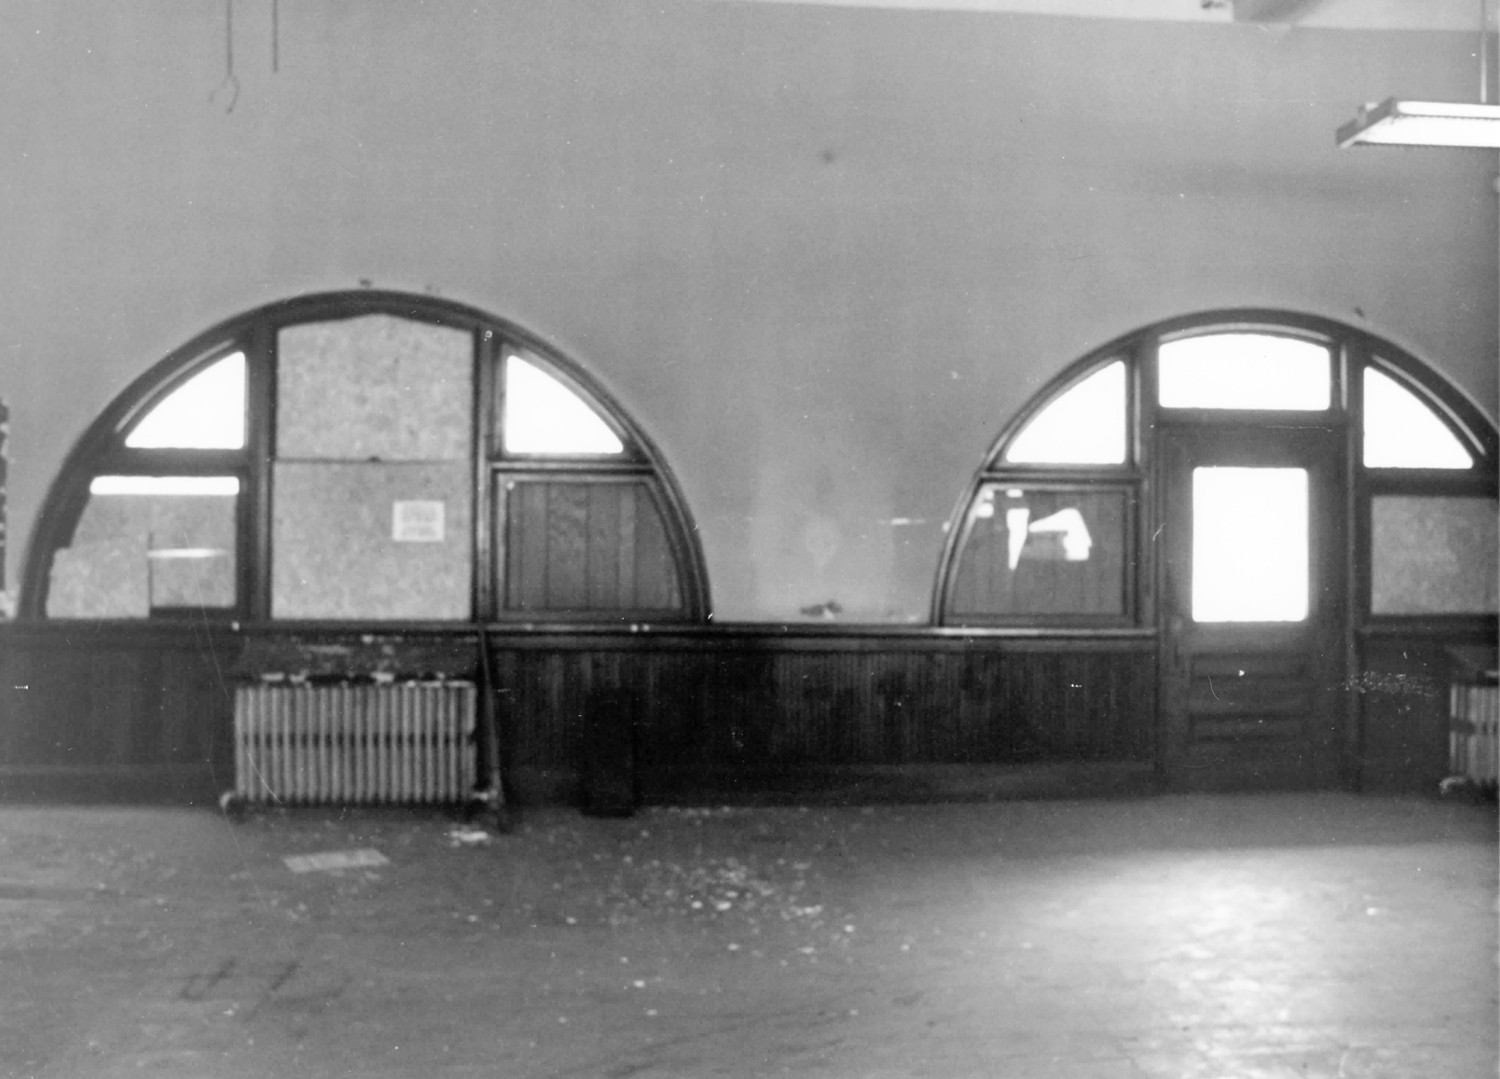 Wellsville Erie Depot, Wellsville New York Rear entrance to waiting room leading to platform looking from waiting room (1987)